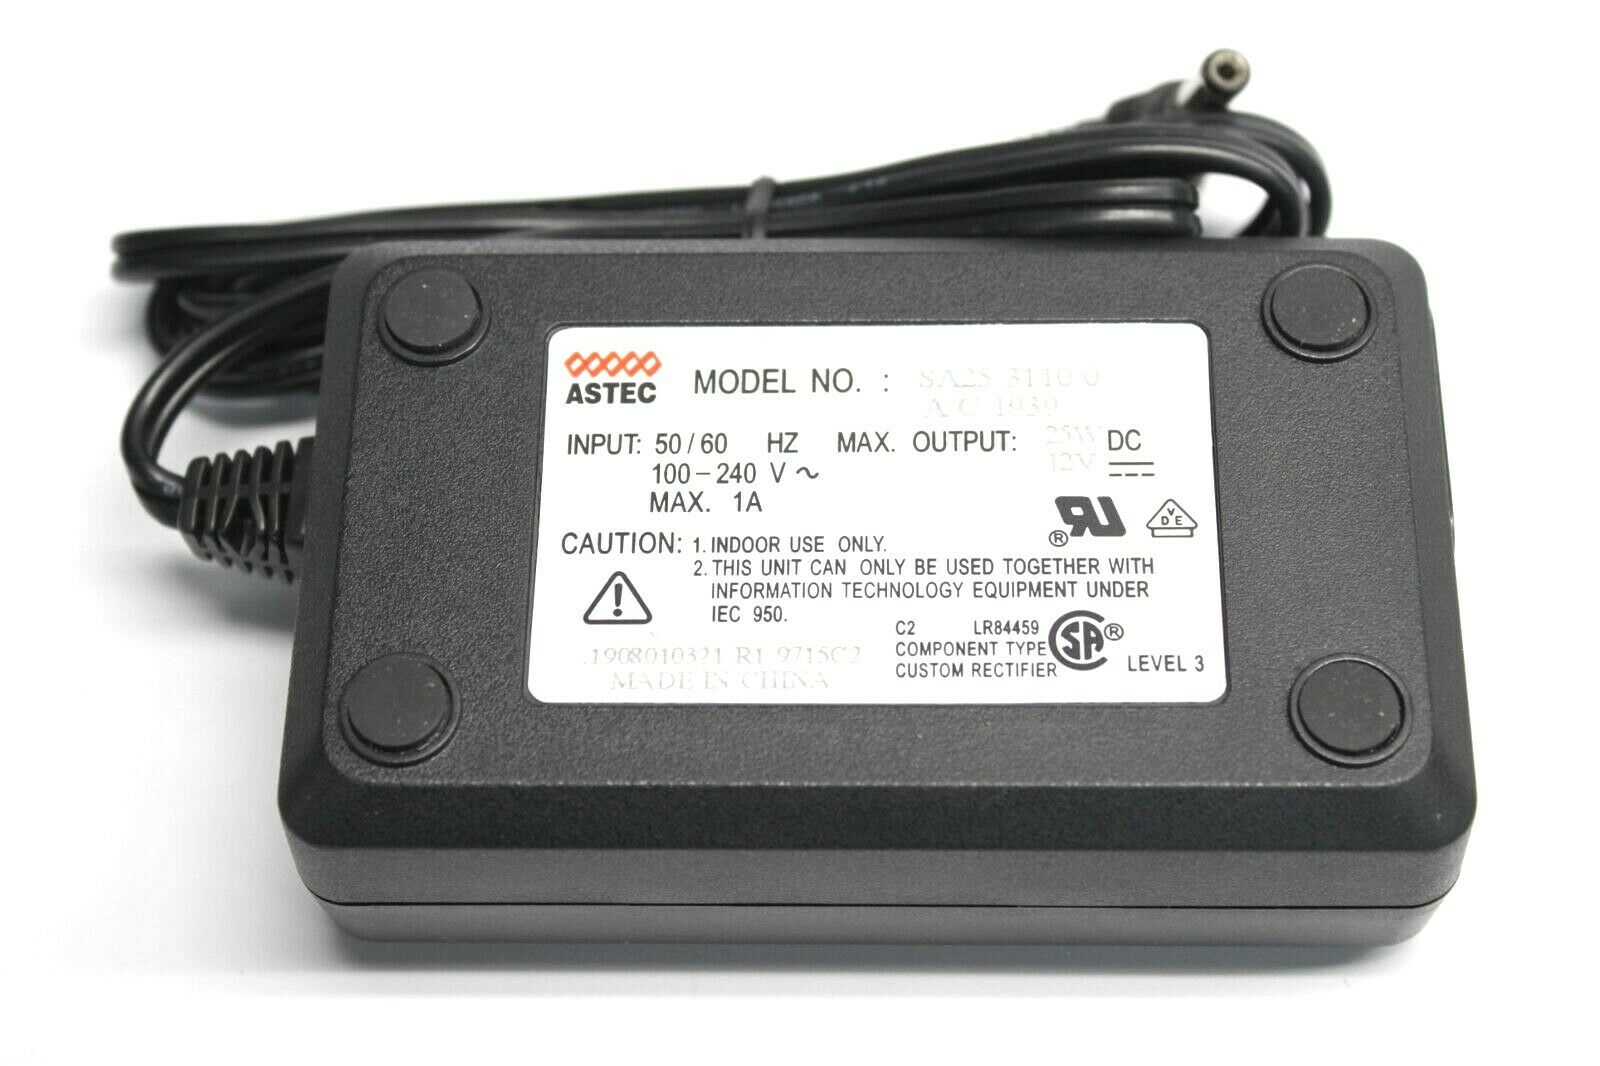 Astec SA25-3110-0 A/C 1939 Power Supply AC Adapter Output 12V 1A Brand: Astec Type: Adapter MPN: Does Not Apply M